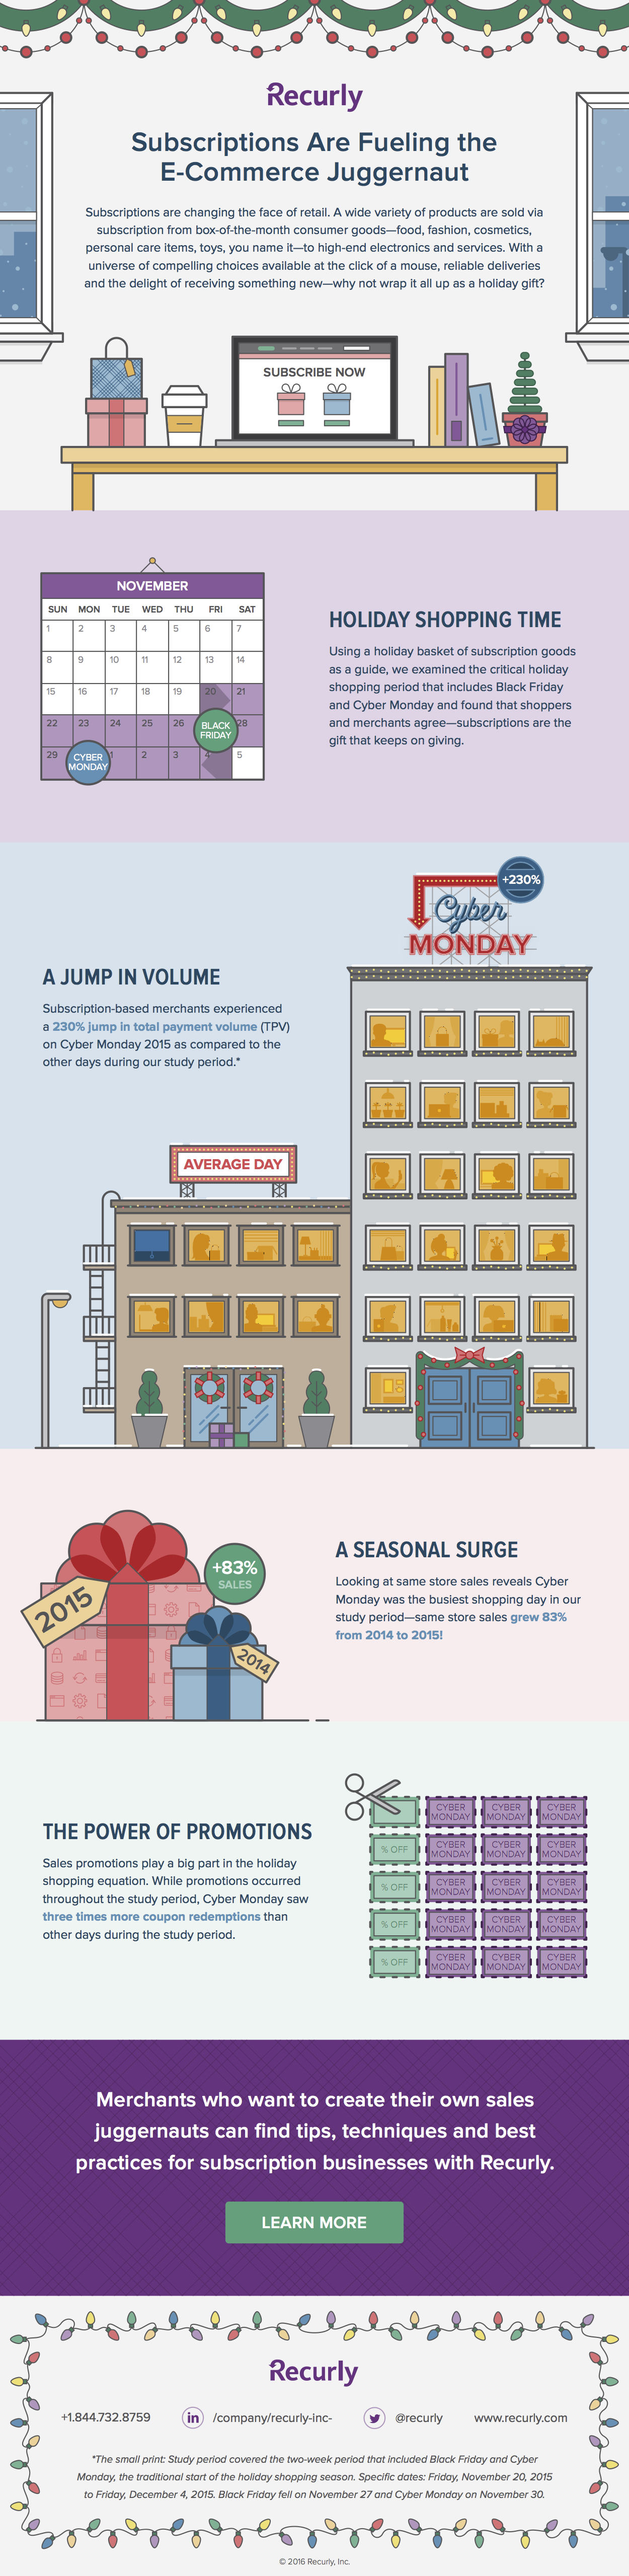 Recurly holiday infographic